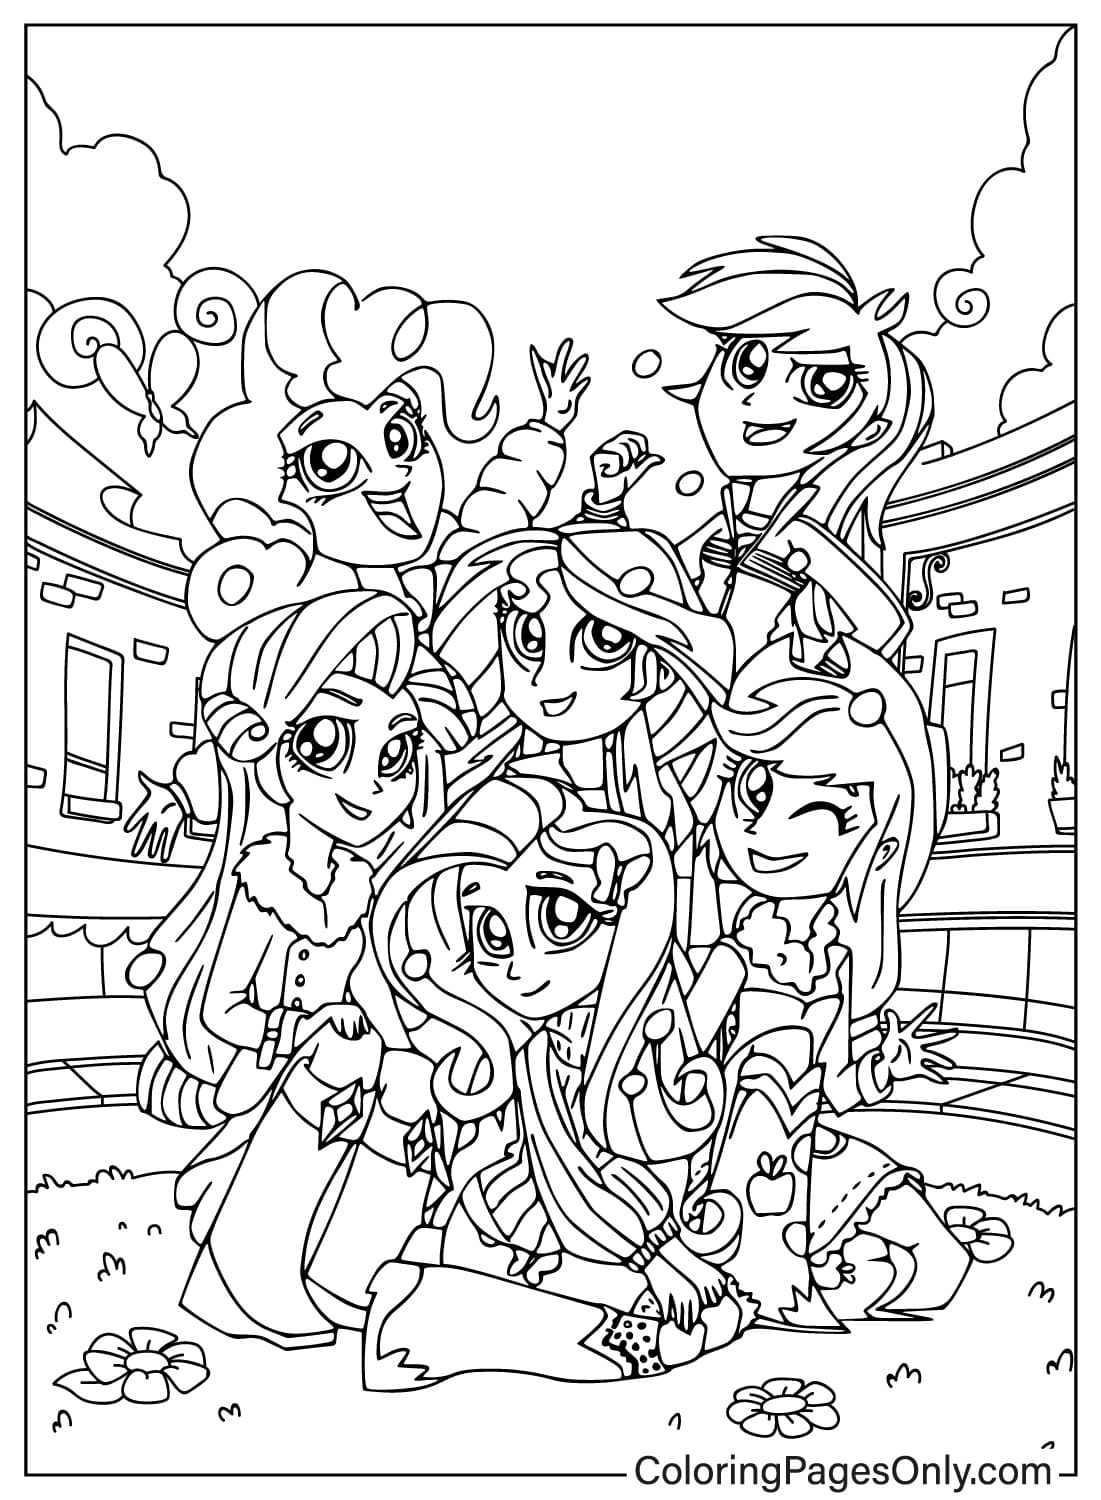 Free Equestria Girls Coloring Page